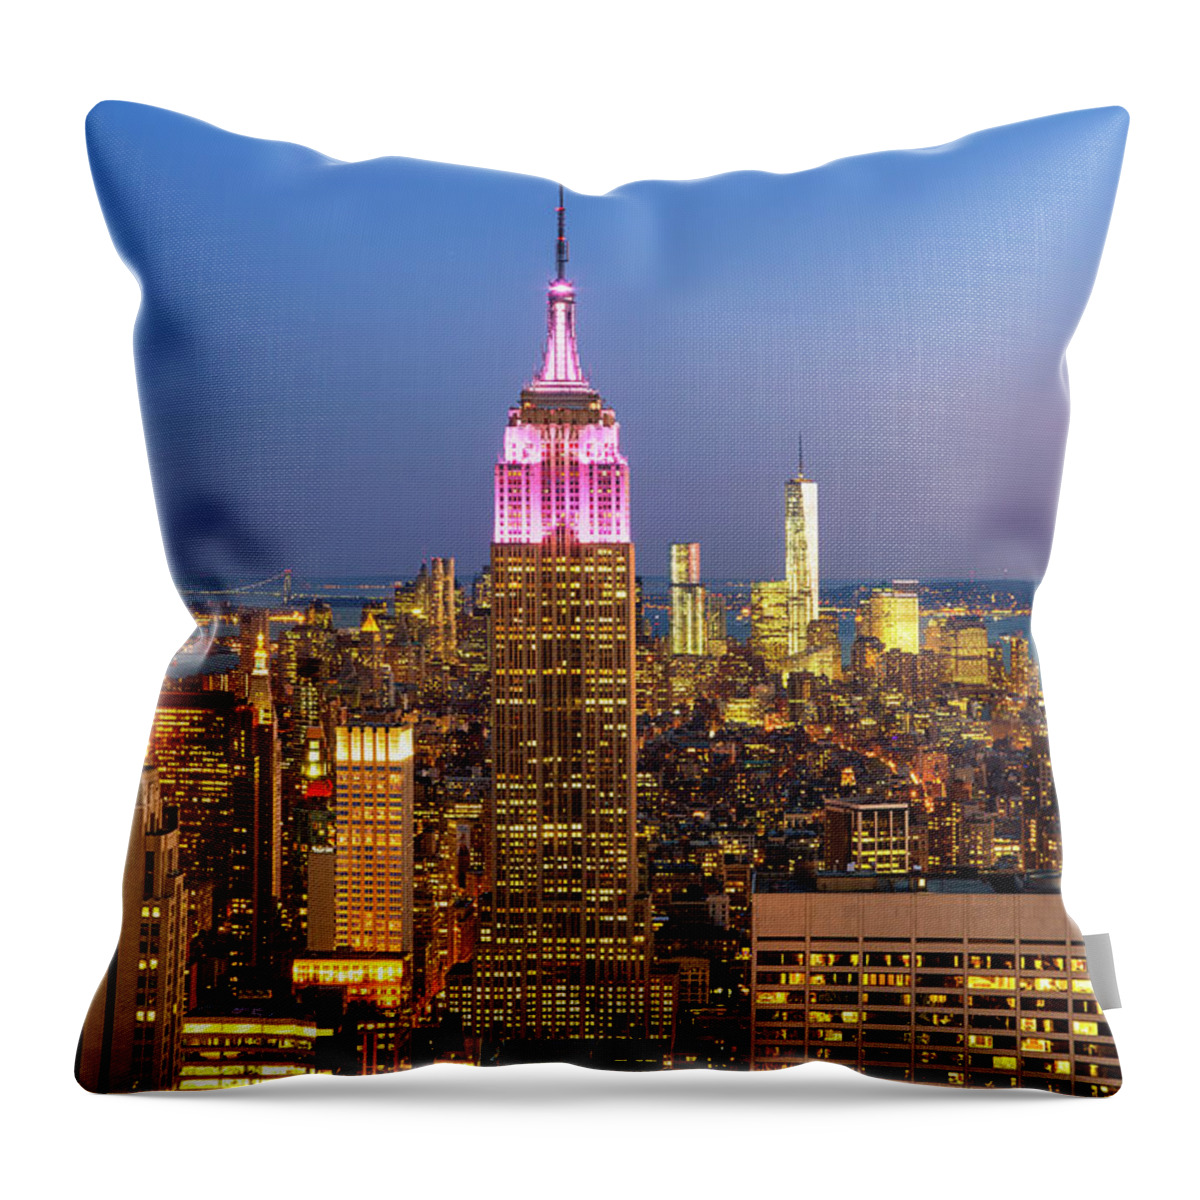 Tranquility Throw Pillow featuring the photograph Empire State Building At Dusk by Sylvain Sonnet